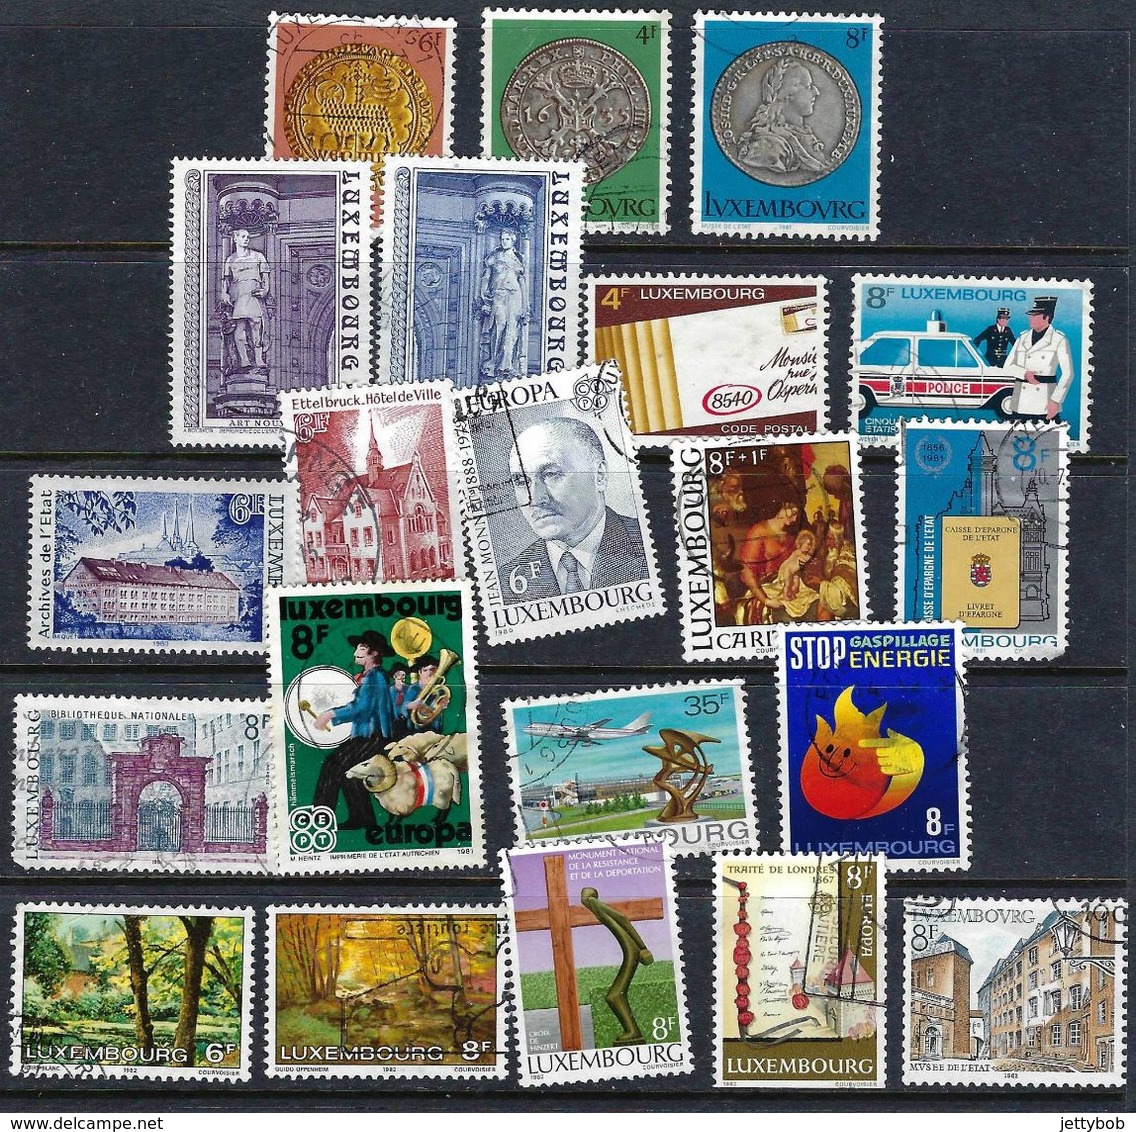 LUXEMBOURG Collection of 330+ stamps from 1882 to 2004 Used